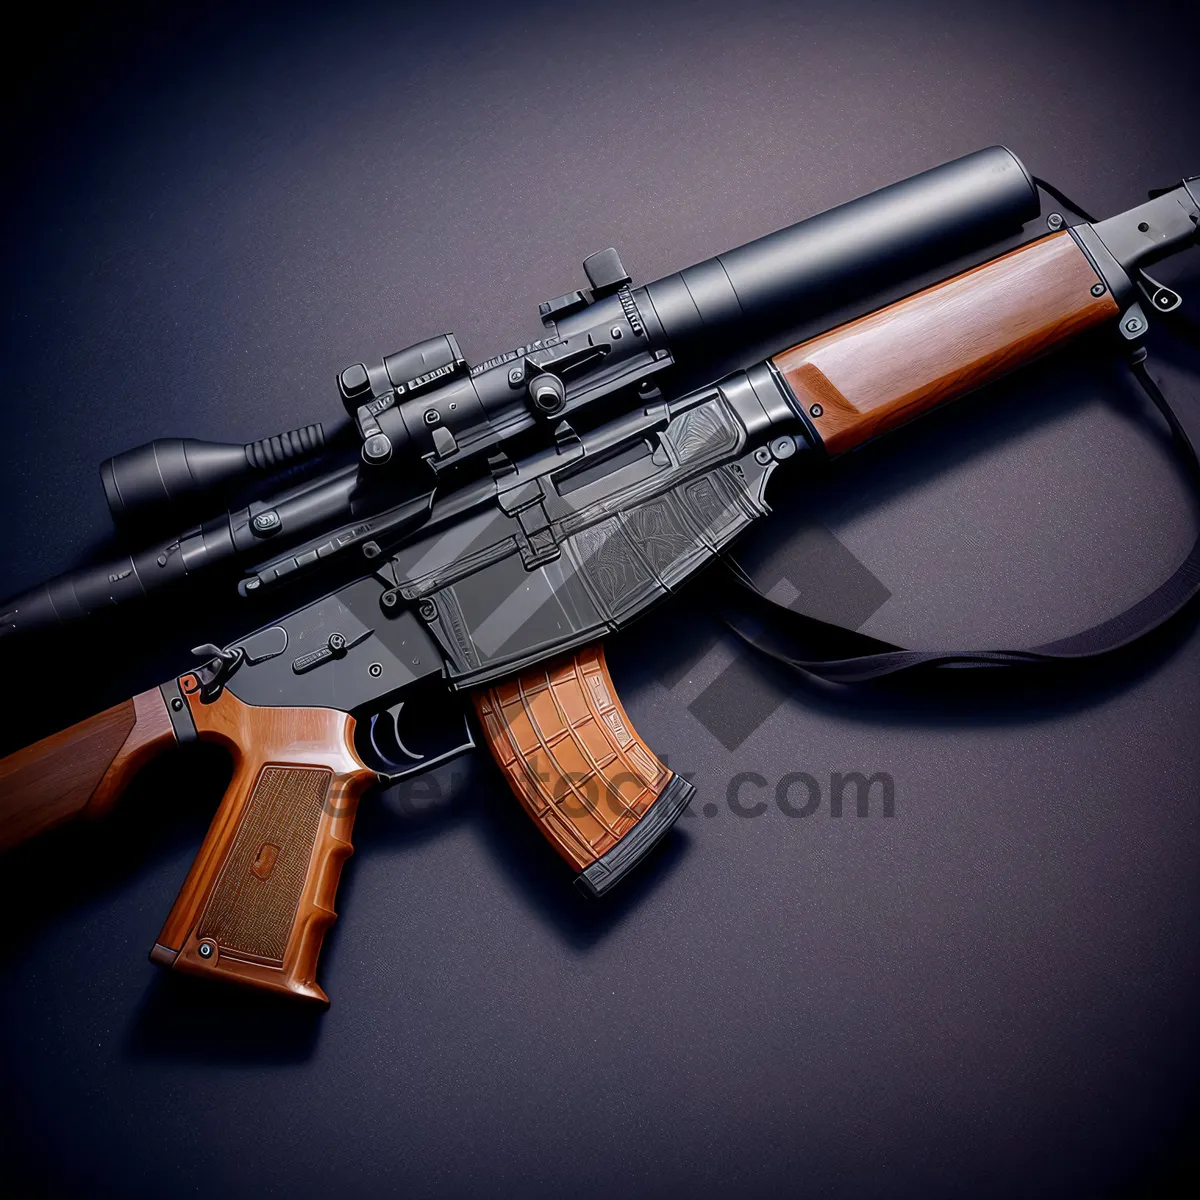 Picture of Black Assault Rifle: Reliable Firearm for Military Use